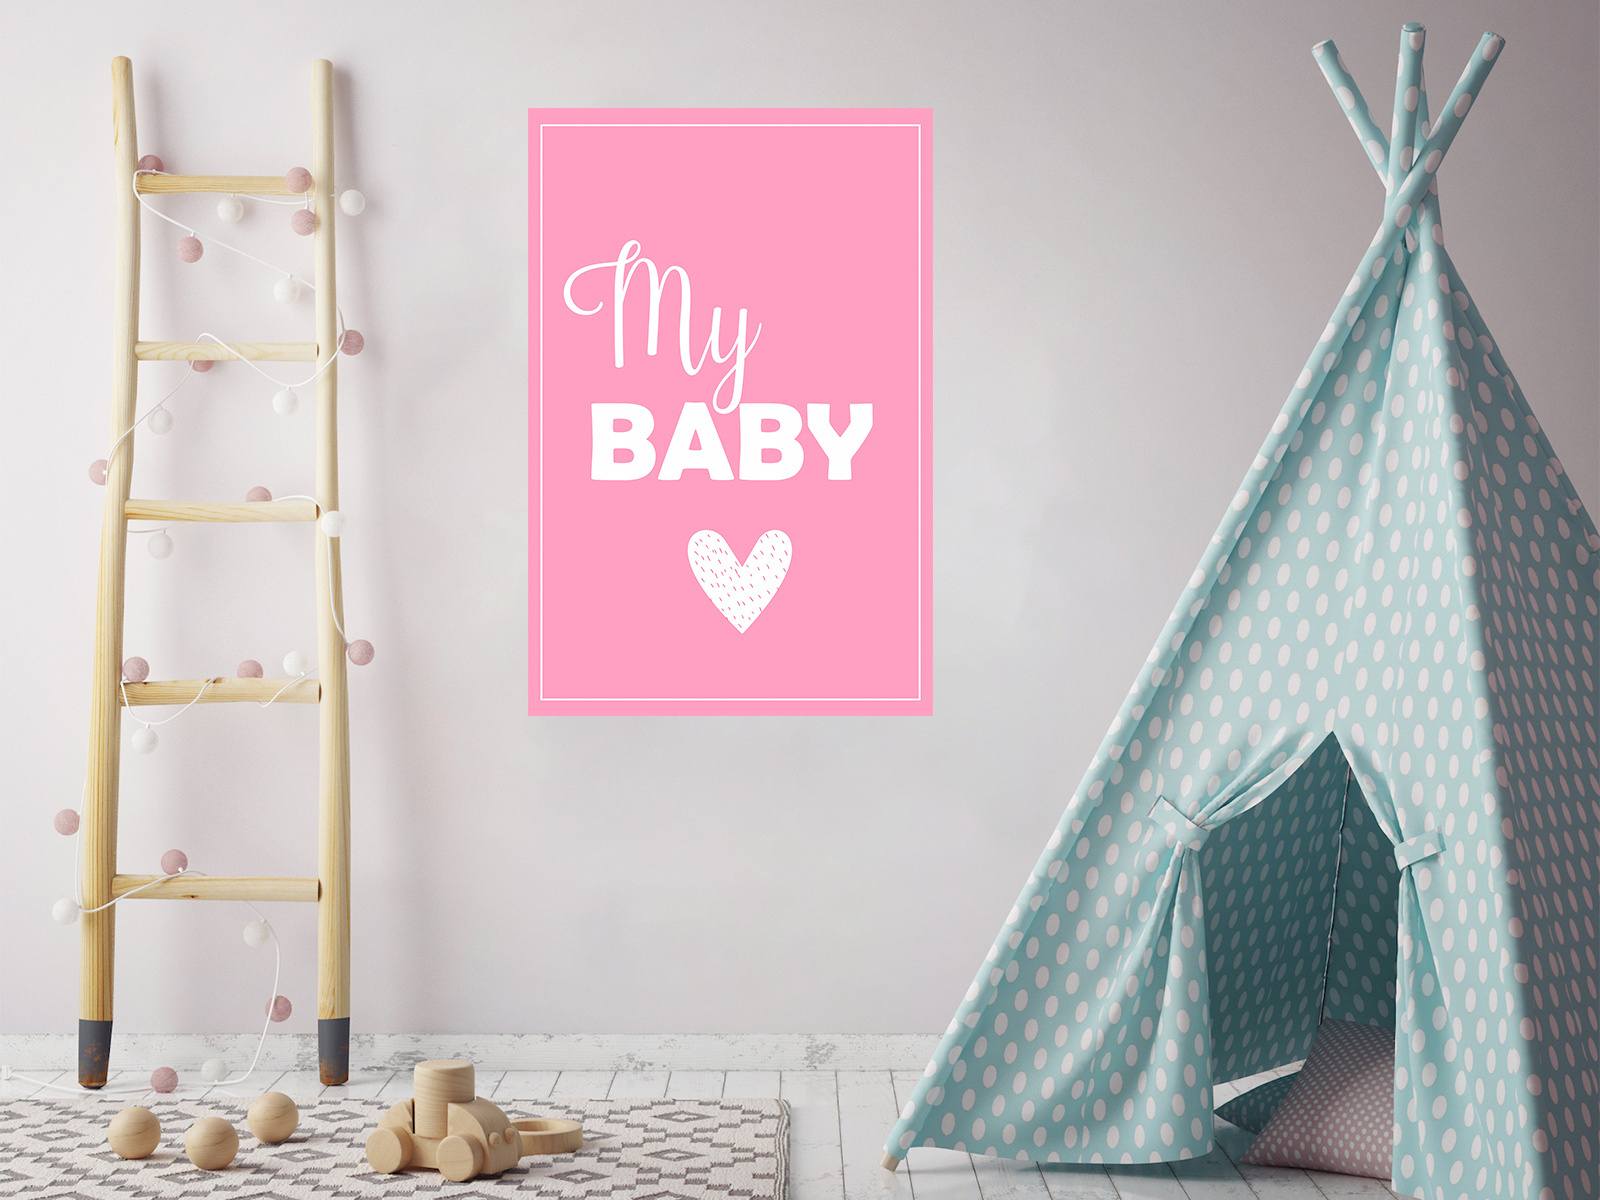 Awkward Styles My Baby Poster Wall Art Kids Room Wall Decor Pink Poster Baby Room Decor Gifts for Kids Baby Girl Room Printed Art Picture Mother Quotes Decor Girls Play Room Wall Decor Pink Poster - image 2 of 3